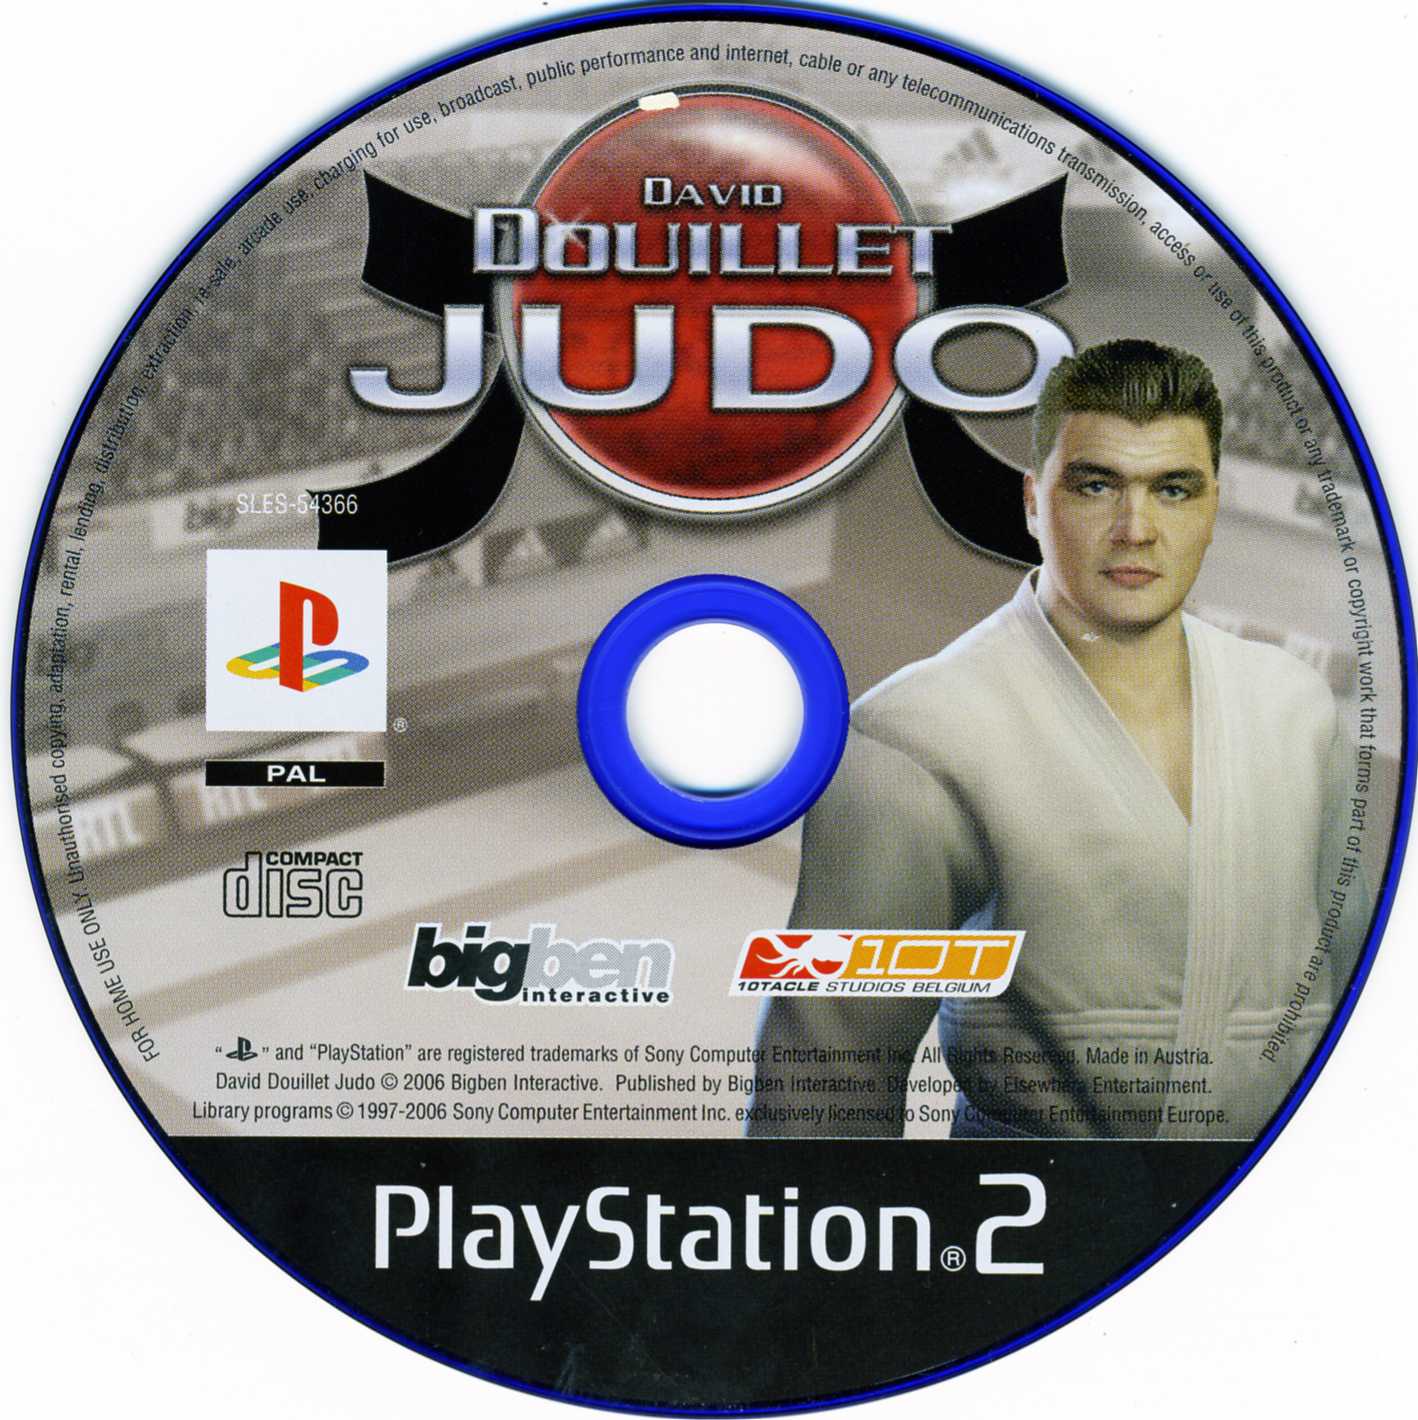 ps3 disk reader for pc